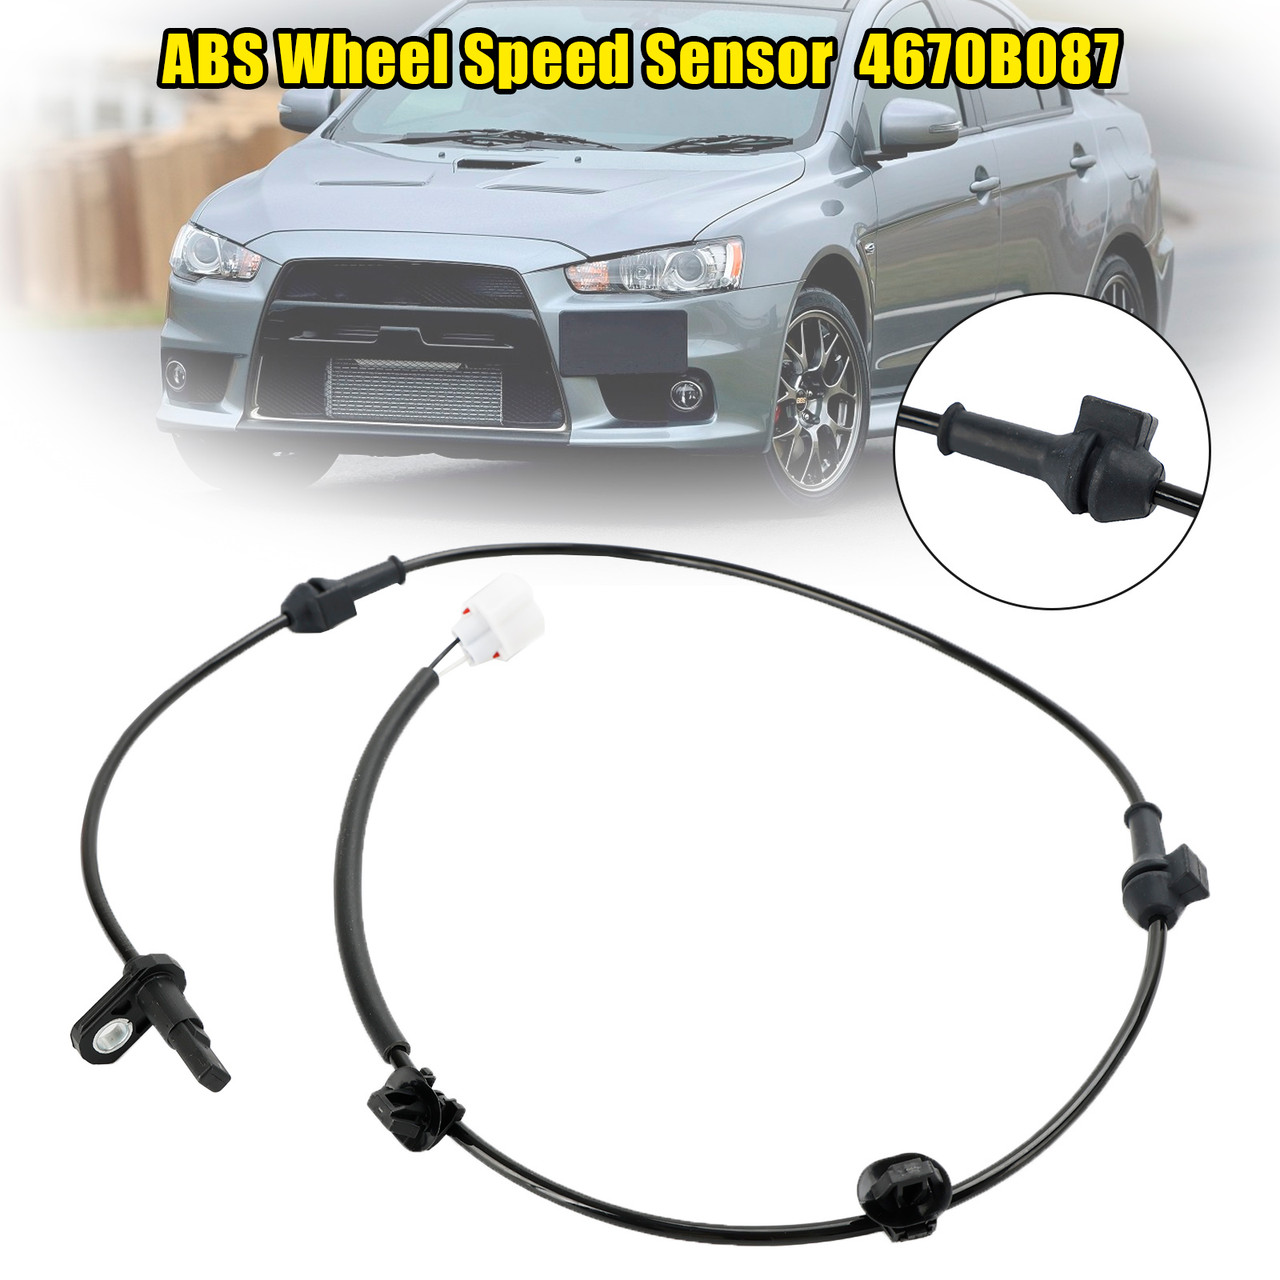 ABS Wheel Speed Sensor Front Left/Right For Mitsubishi Mirage 4670B087